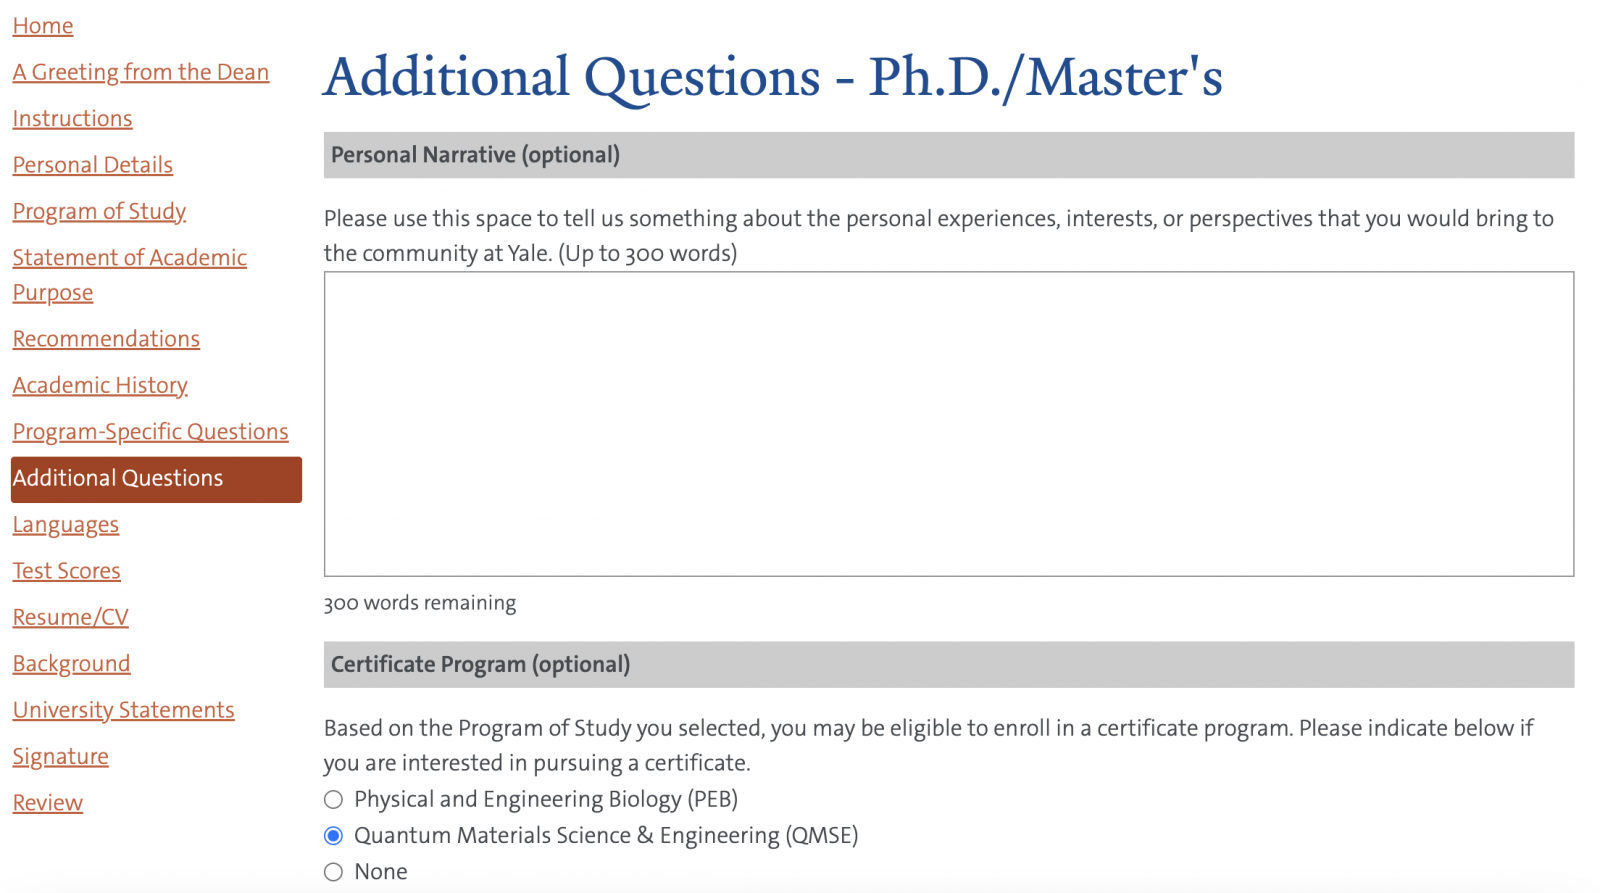 Screenshot of the Additional Questions page of the Yale GSAS application with QMSE selected under the Certificate Programs header